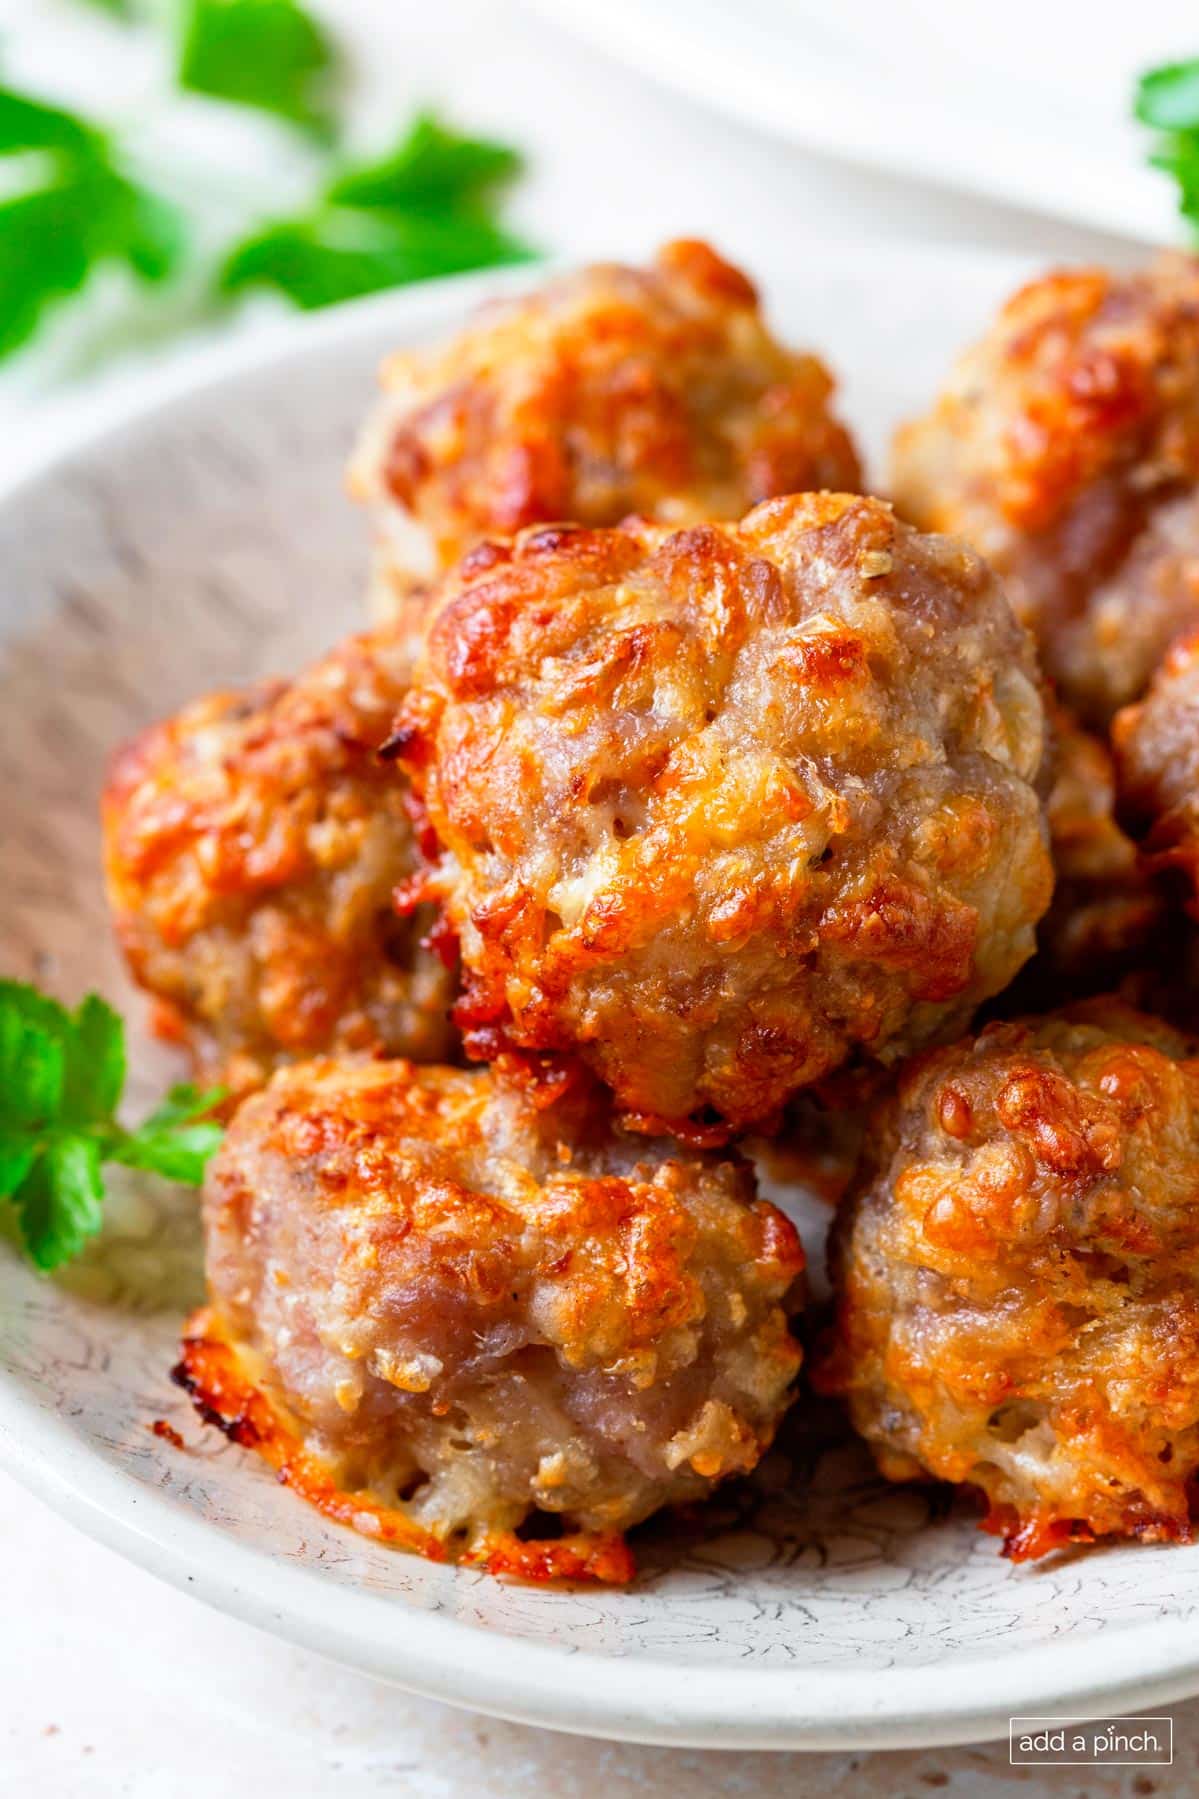 Photo of cooked sausage balls in a white serving bowl.